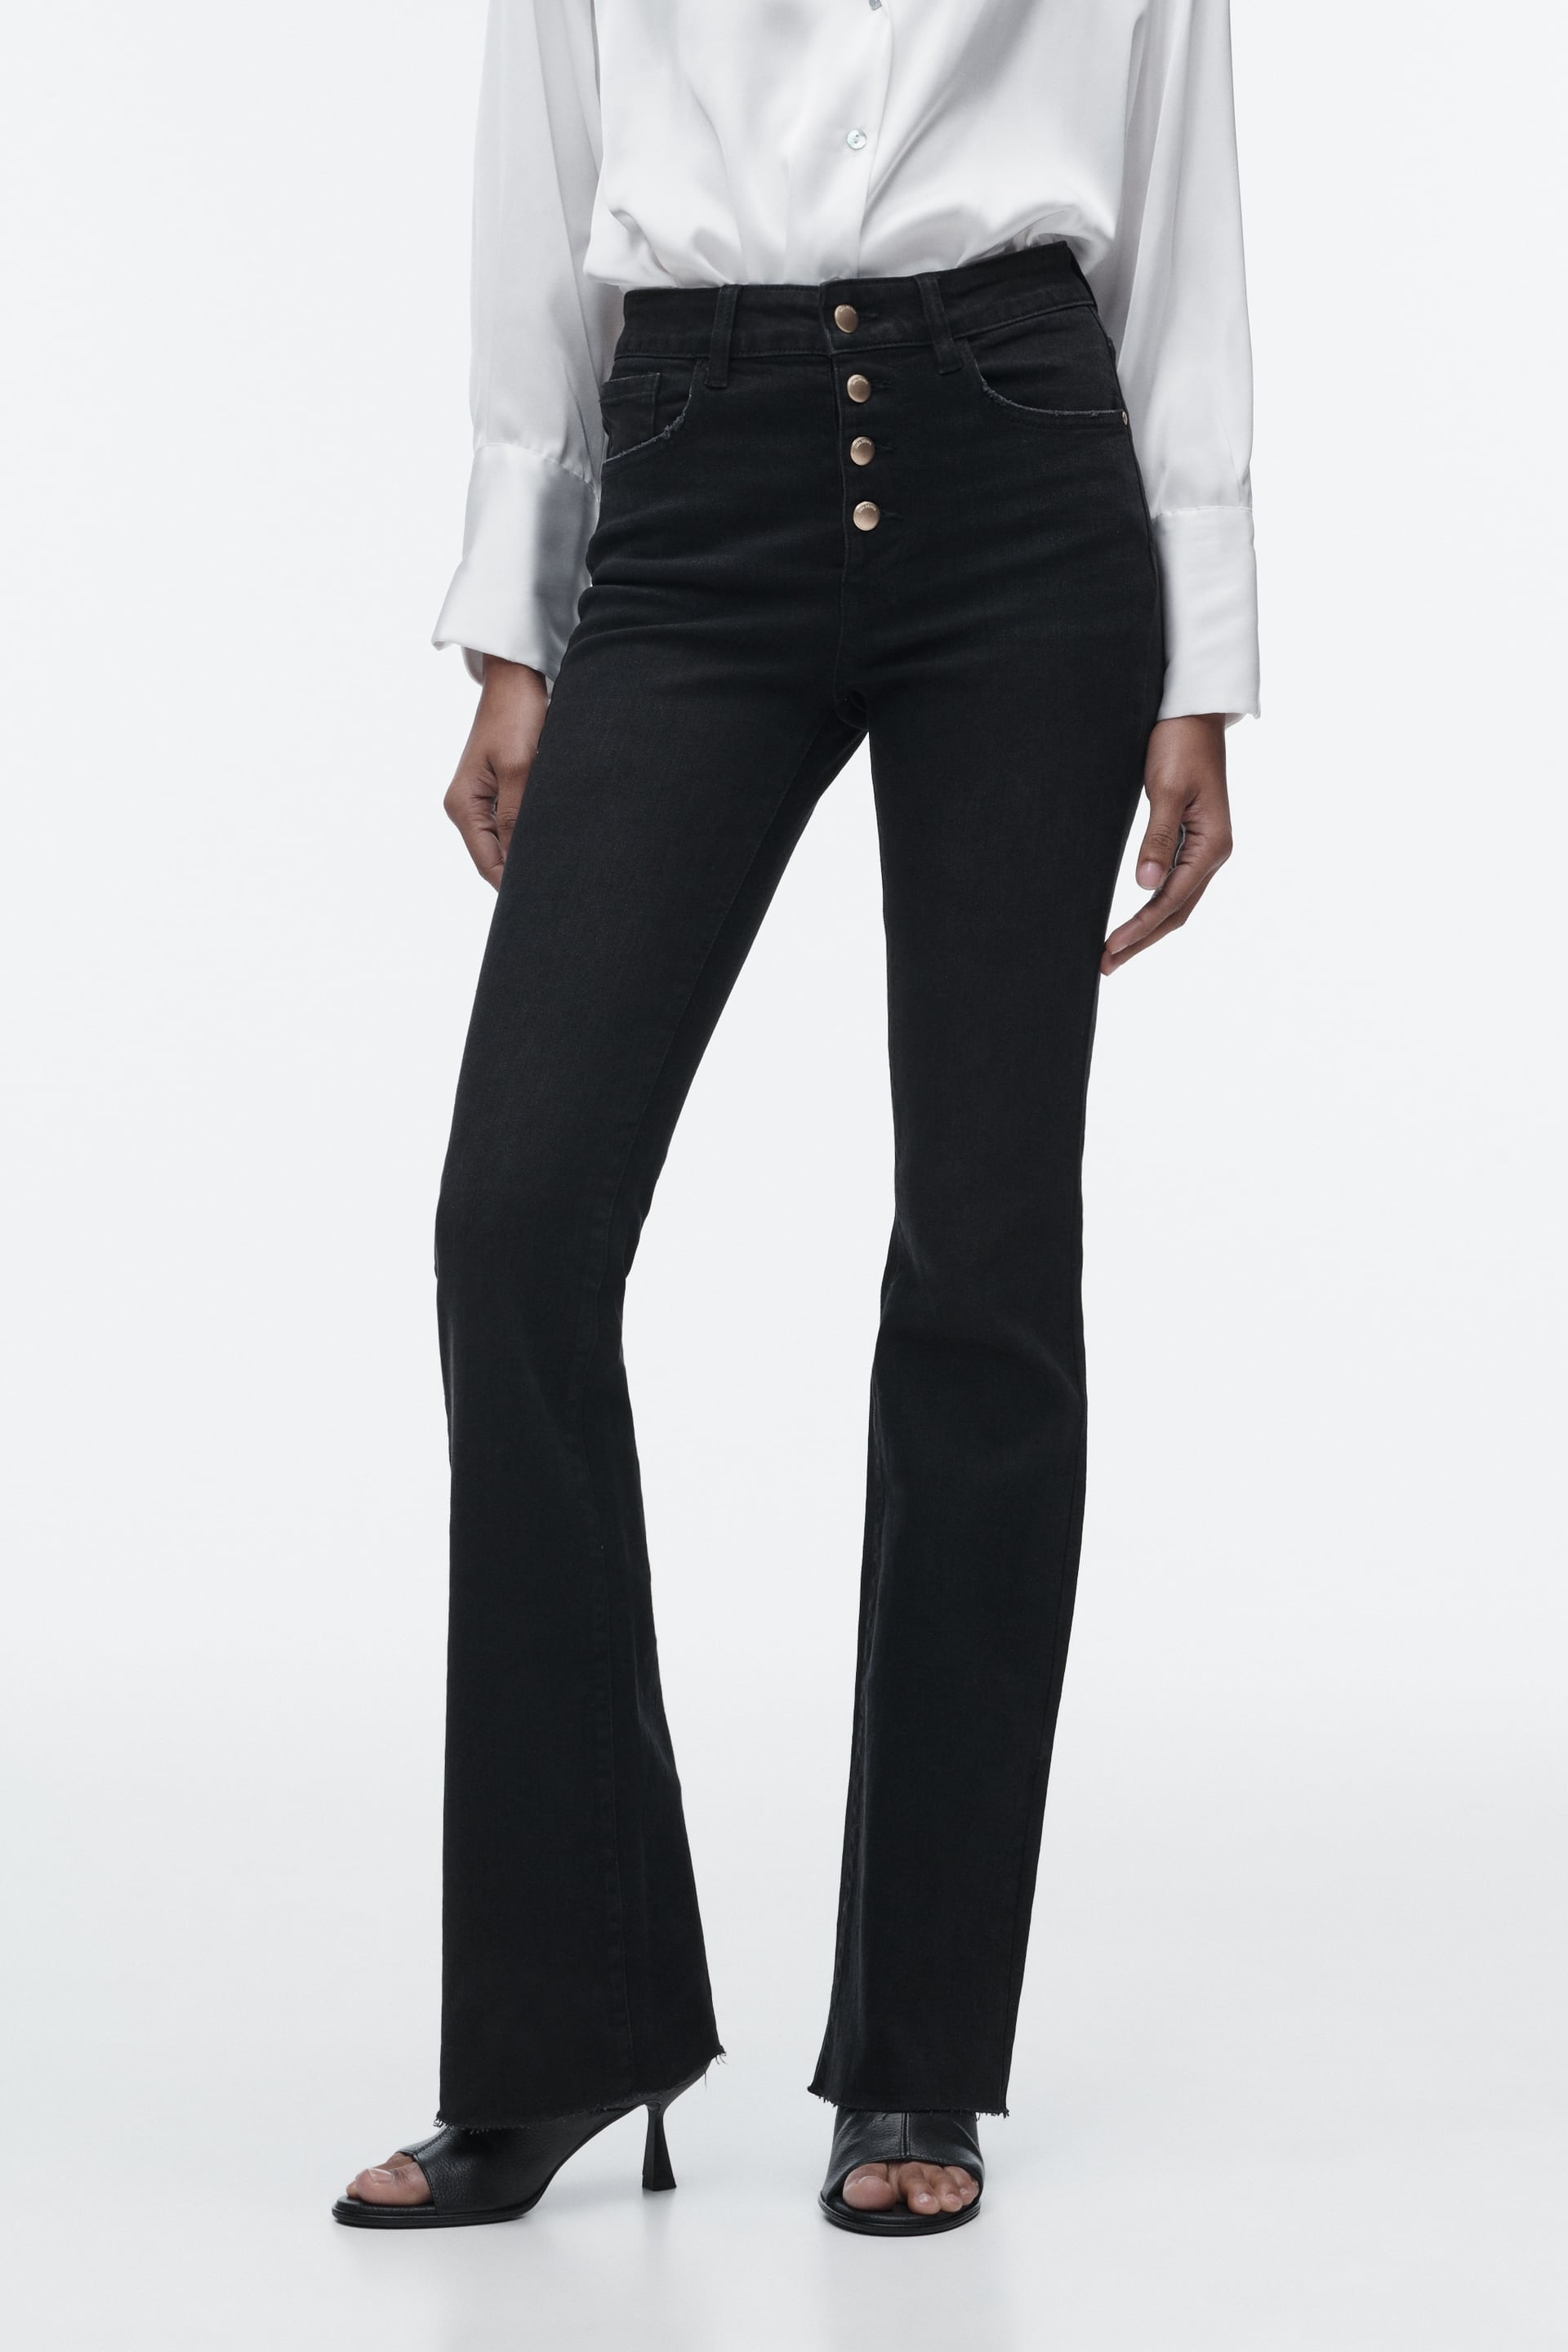 vermomming toevoegen aan terugbetaling HIGH-WAISTED Z1975 FLARE FIT JEANS - Black | ZARA United States